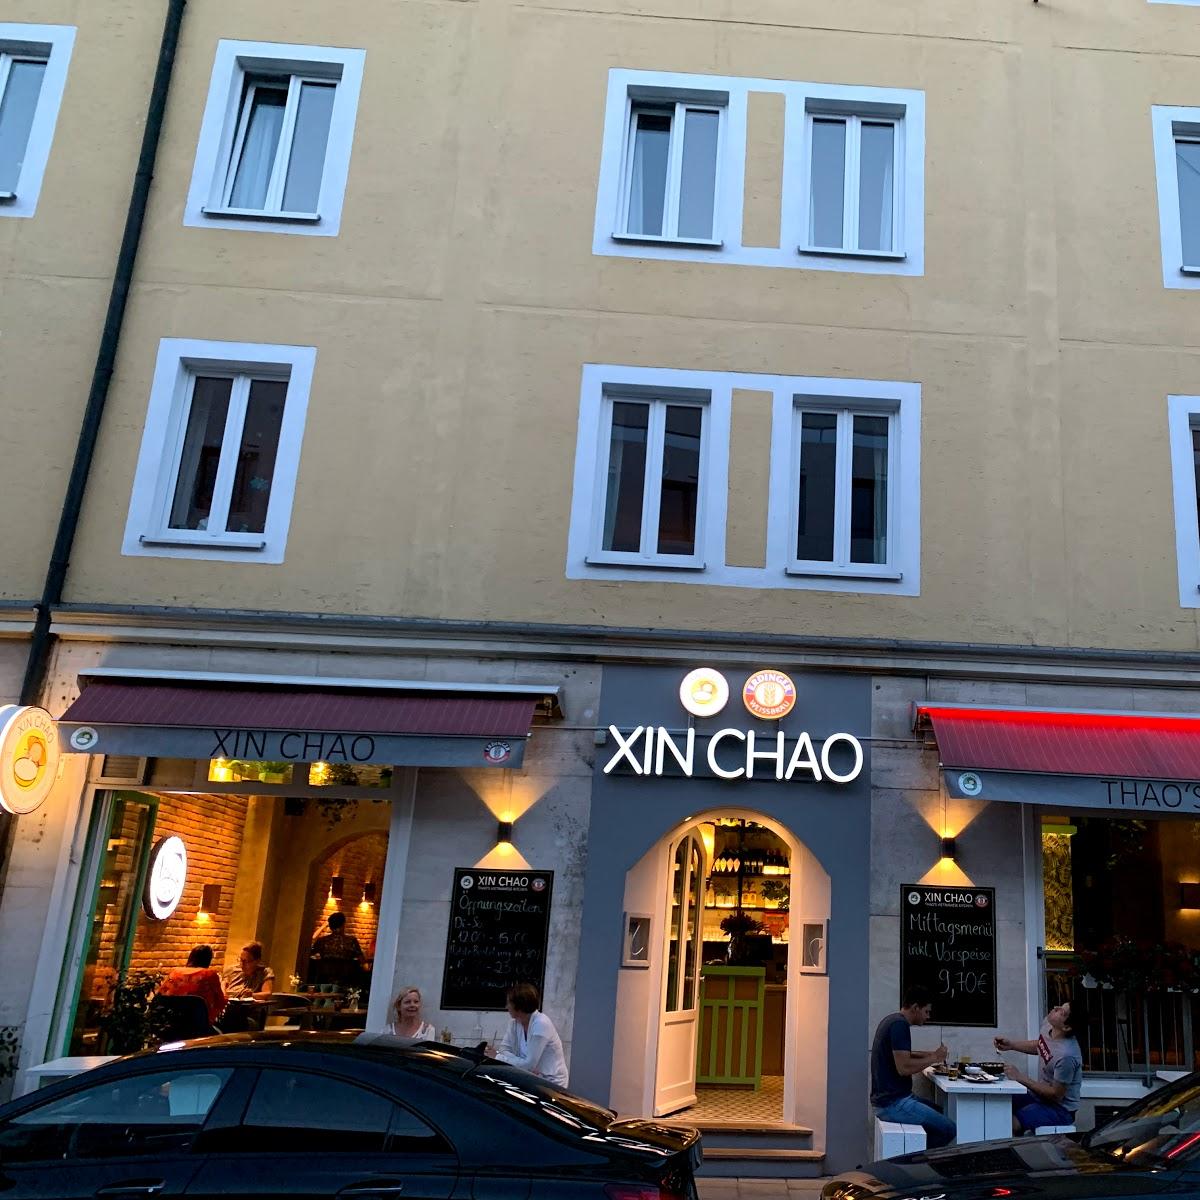 Restaurant "Xin Chao" in München